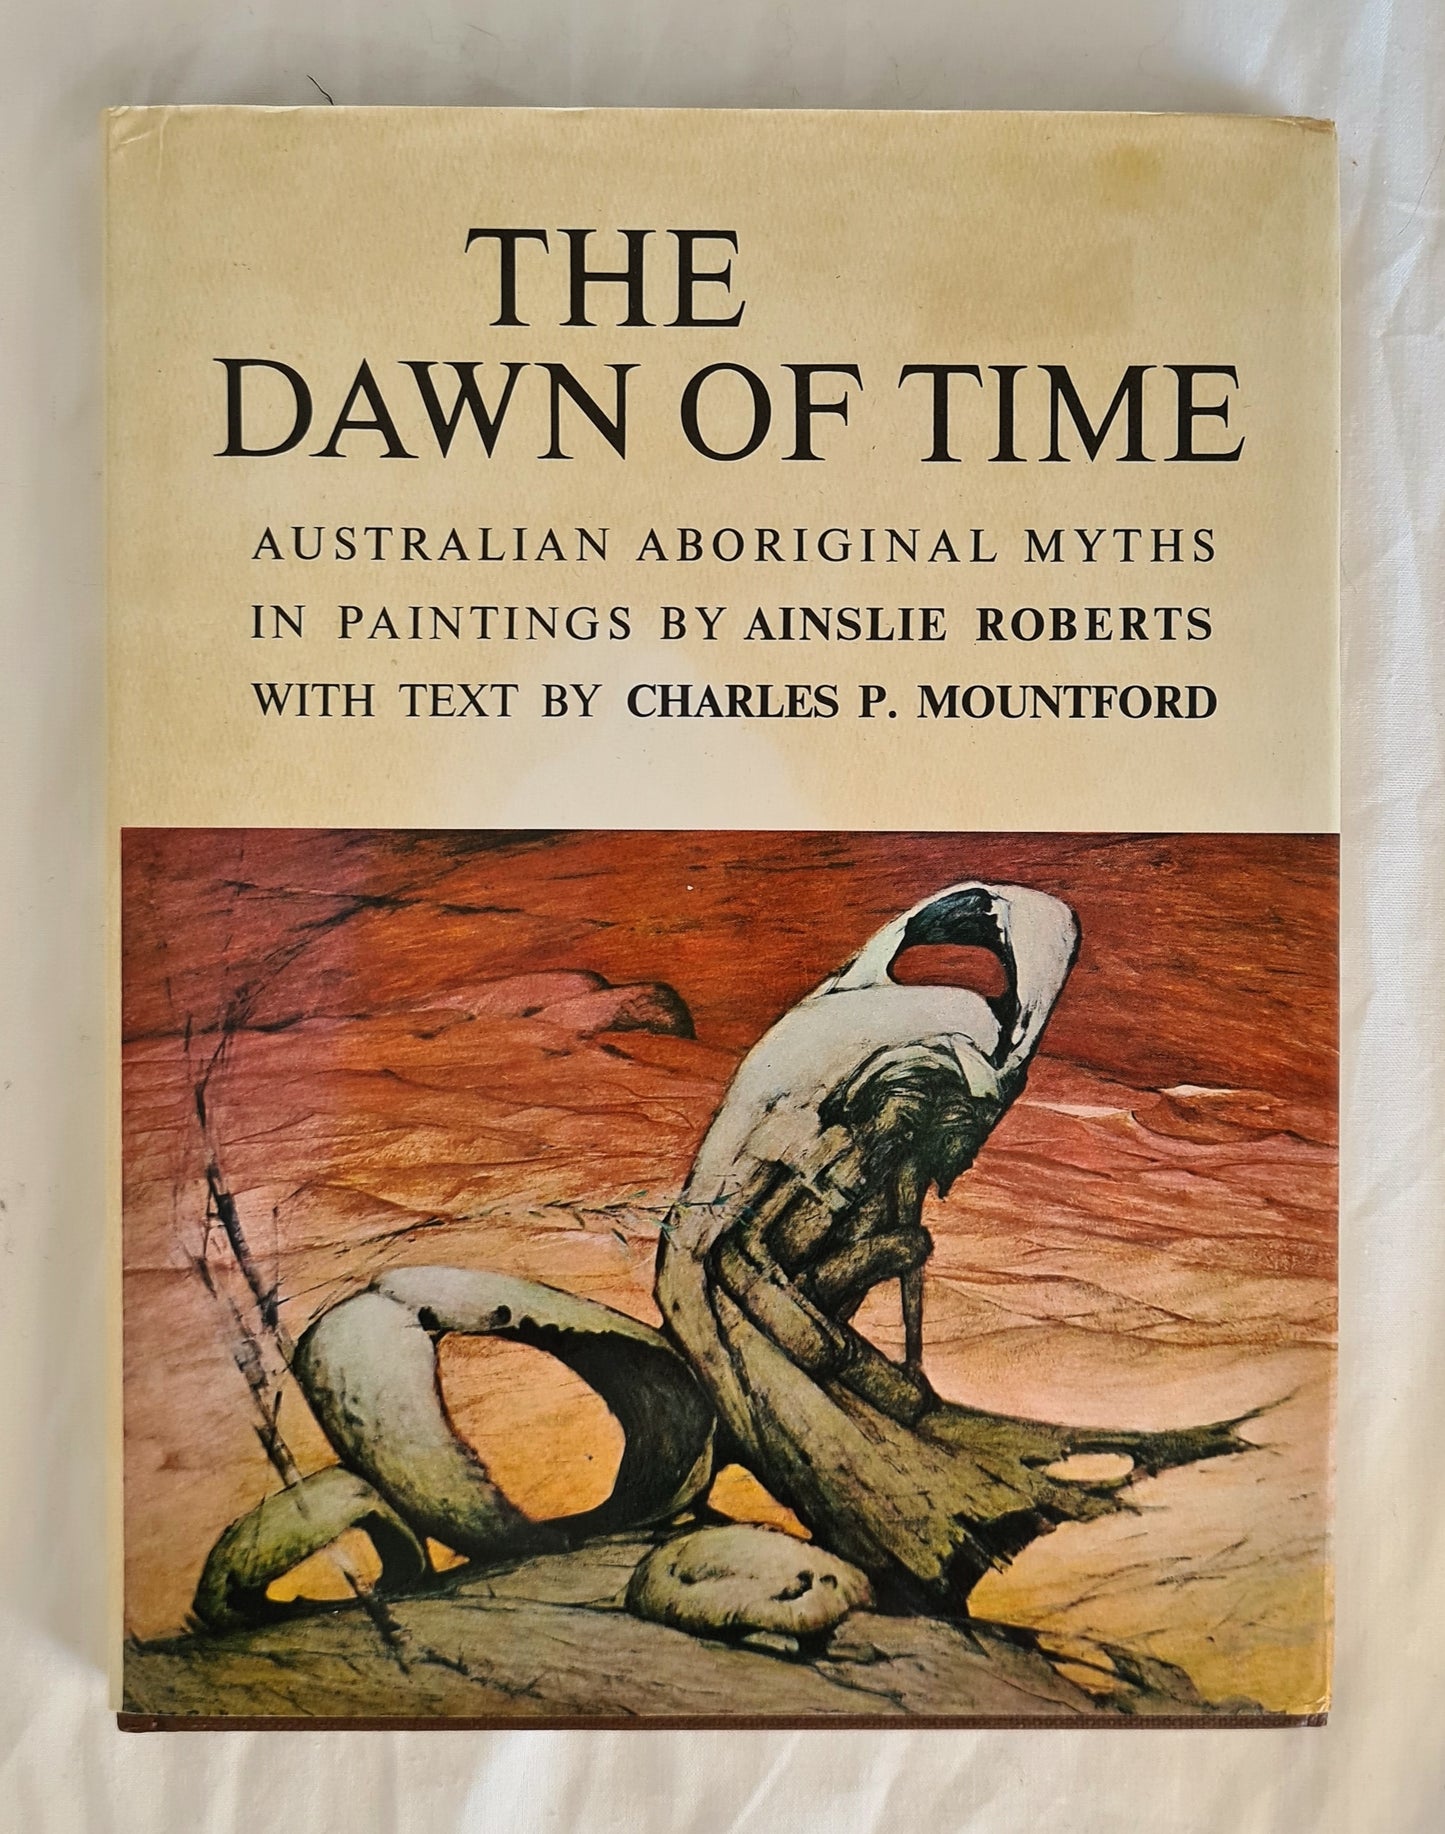 The Dawn of Time  Australian Aboriginal Myths in Paintings  Paintings by Ainslie Roberts  Text by Charles P. Mountford